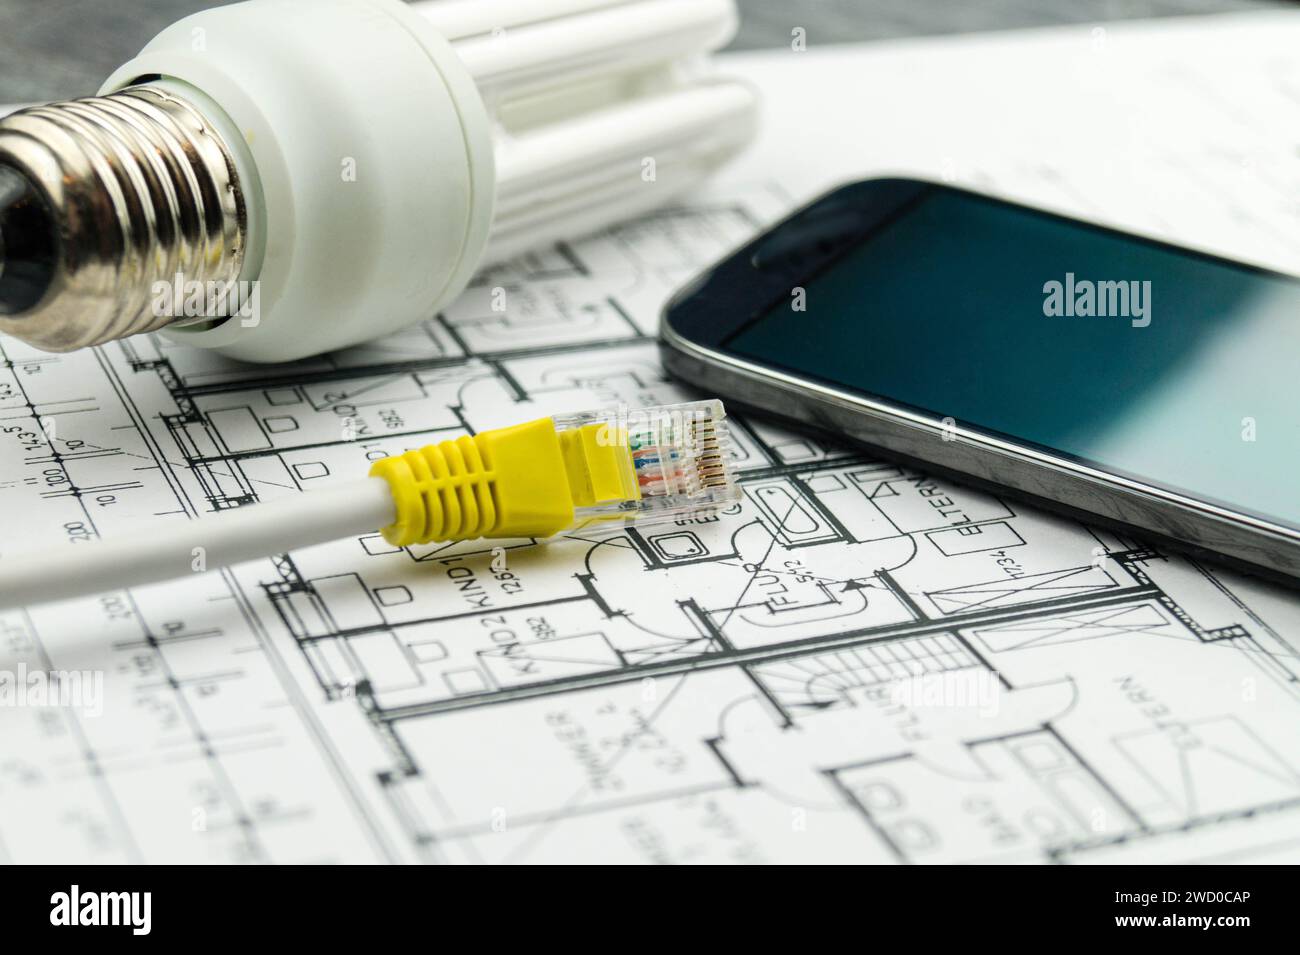 Energy-saving lamp, smart phone and network plug on construction drawings, symbolic image for smart home Stock Photo